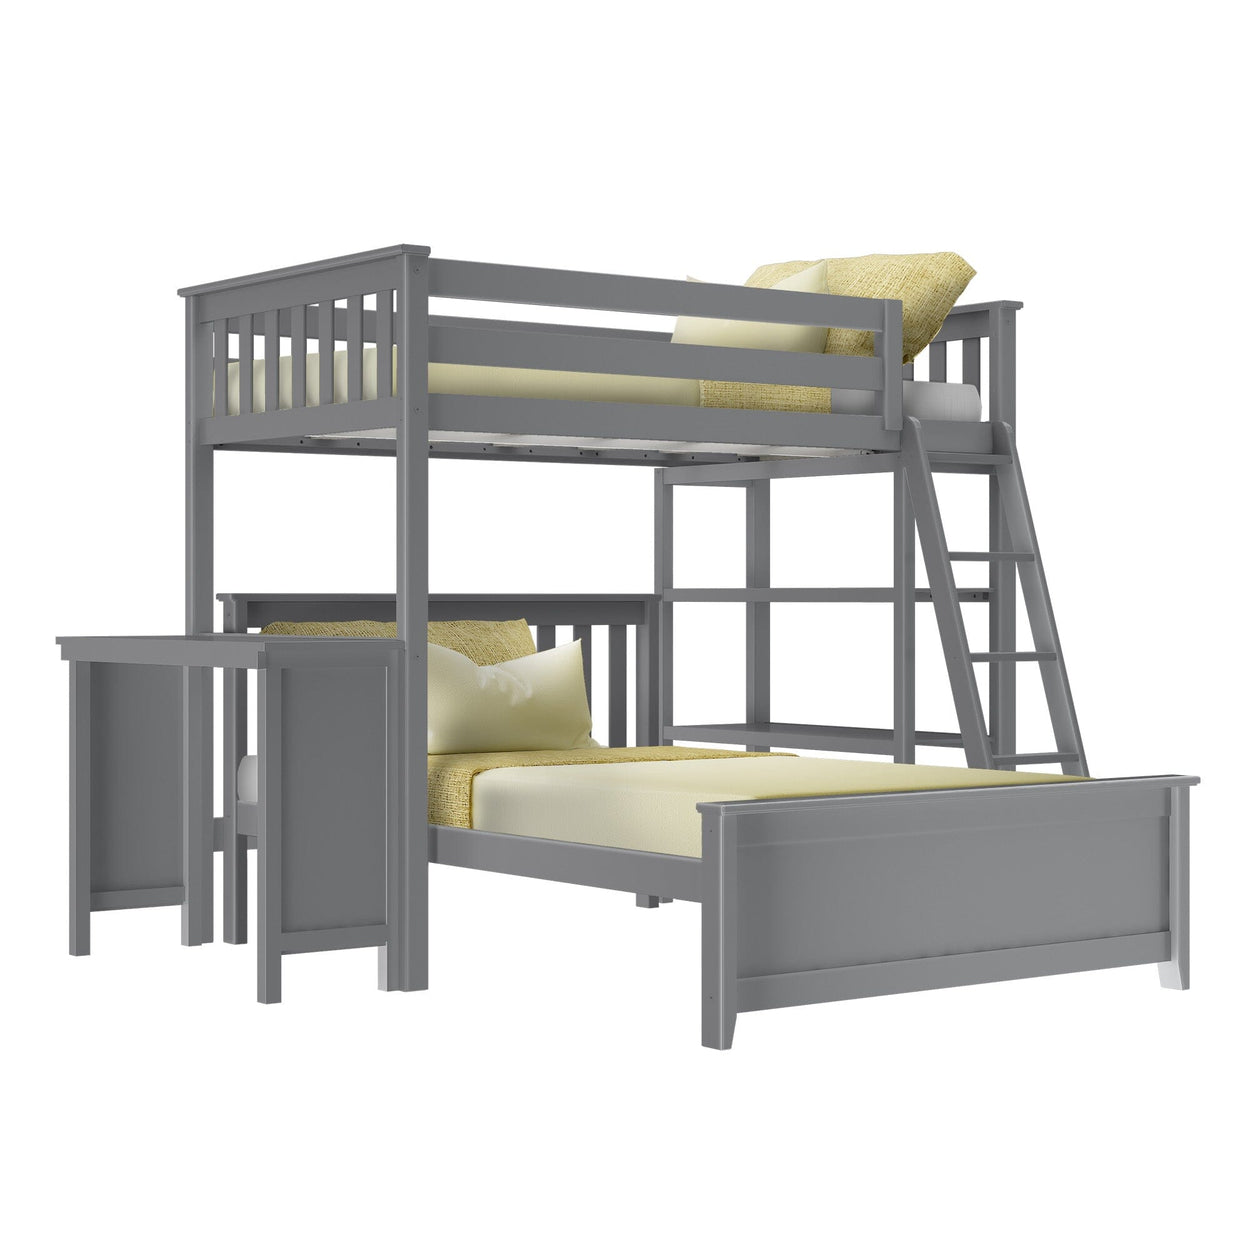 18-902-121 : Bunk Beds L-Shaped Twin over Full Bunk Bed with Bookcase and Desk, Grey